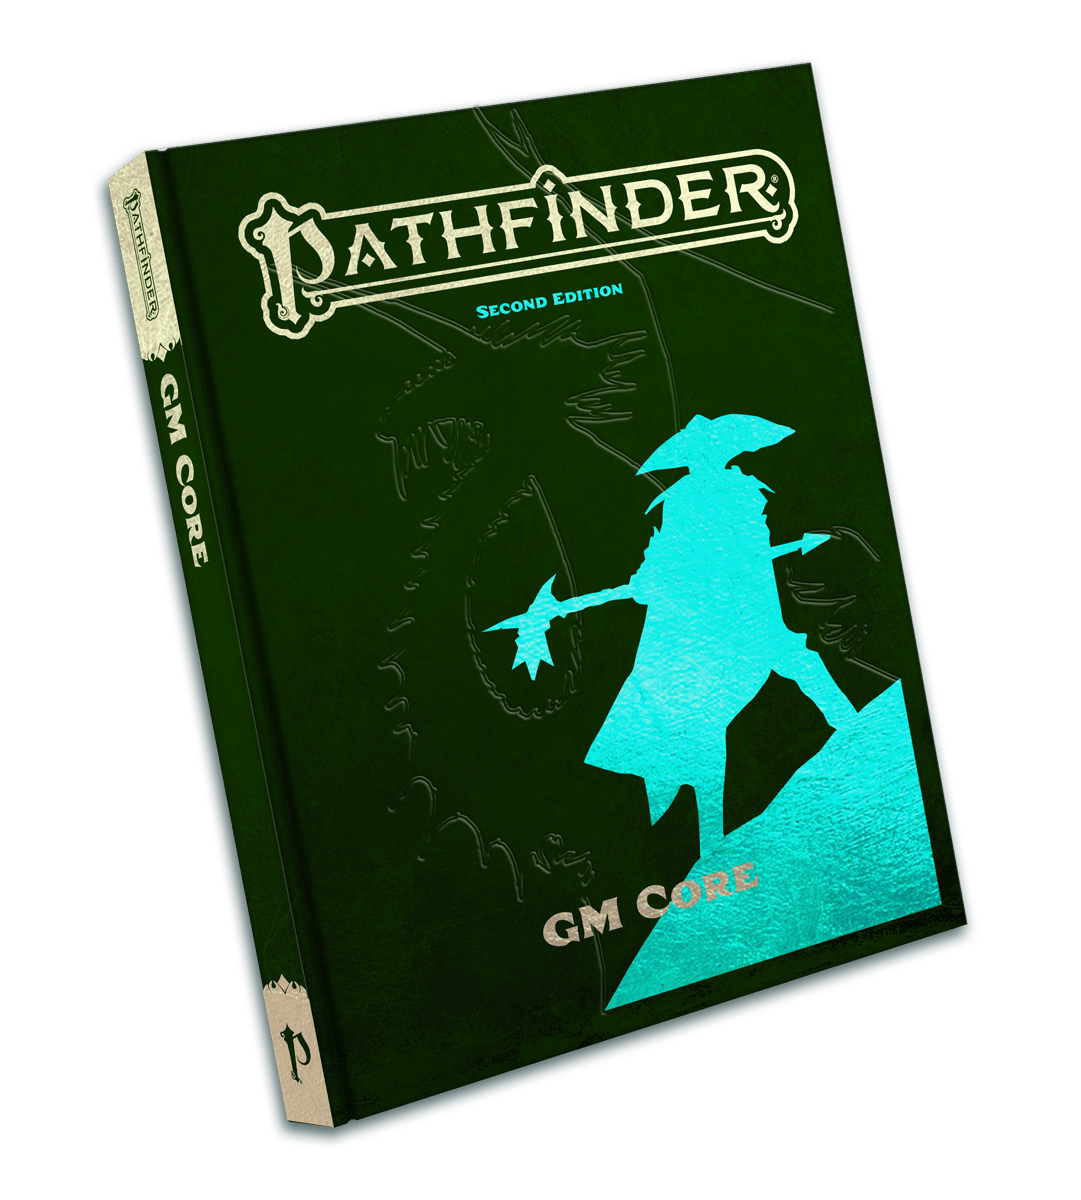 Pathfinder: GM Core Special Edition (Second Edition) - Gamescape